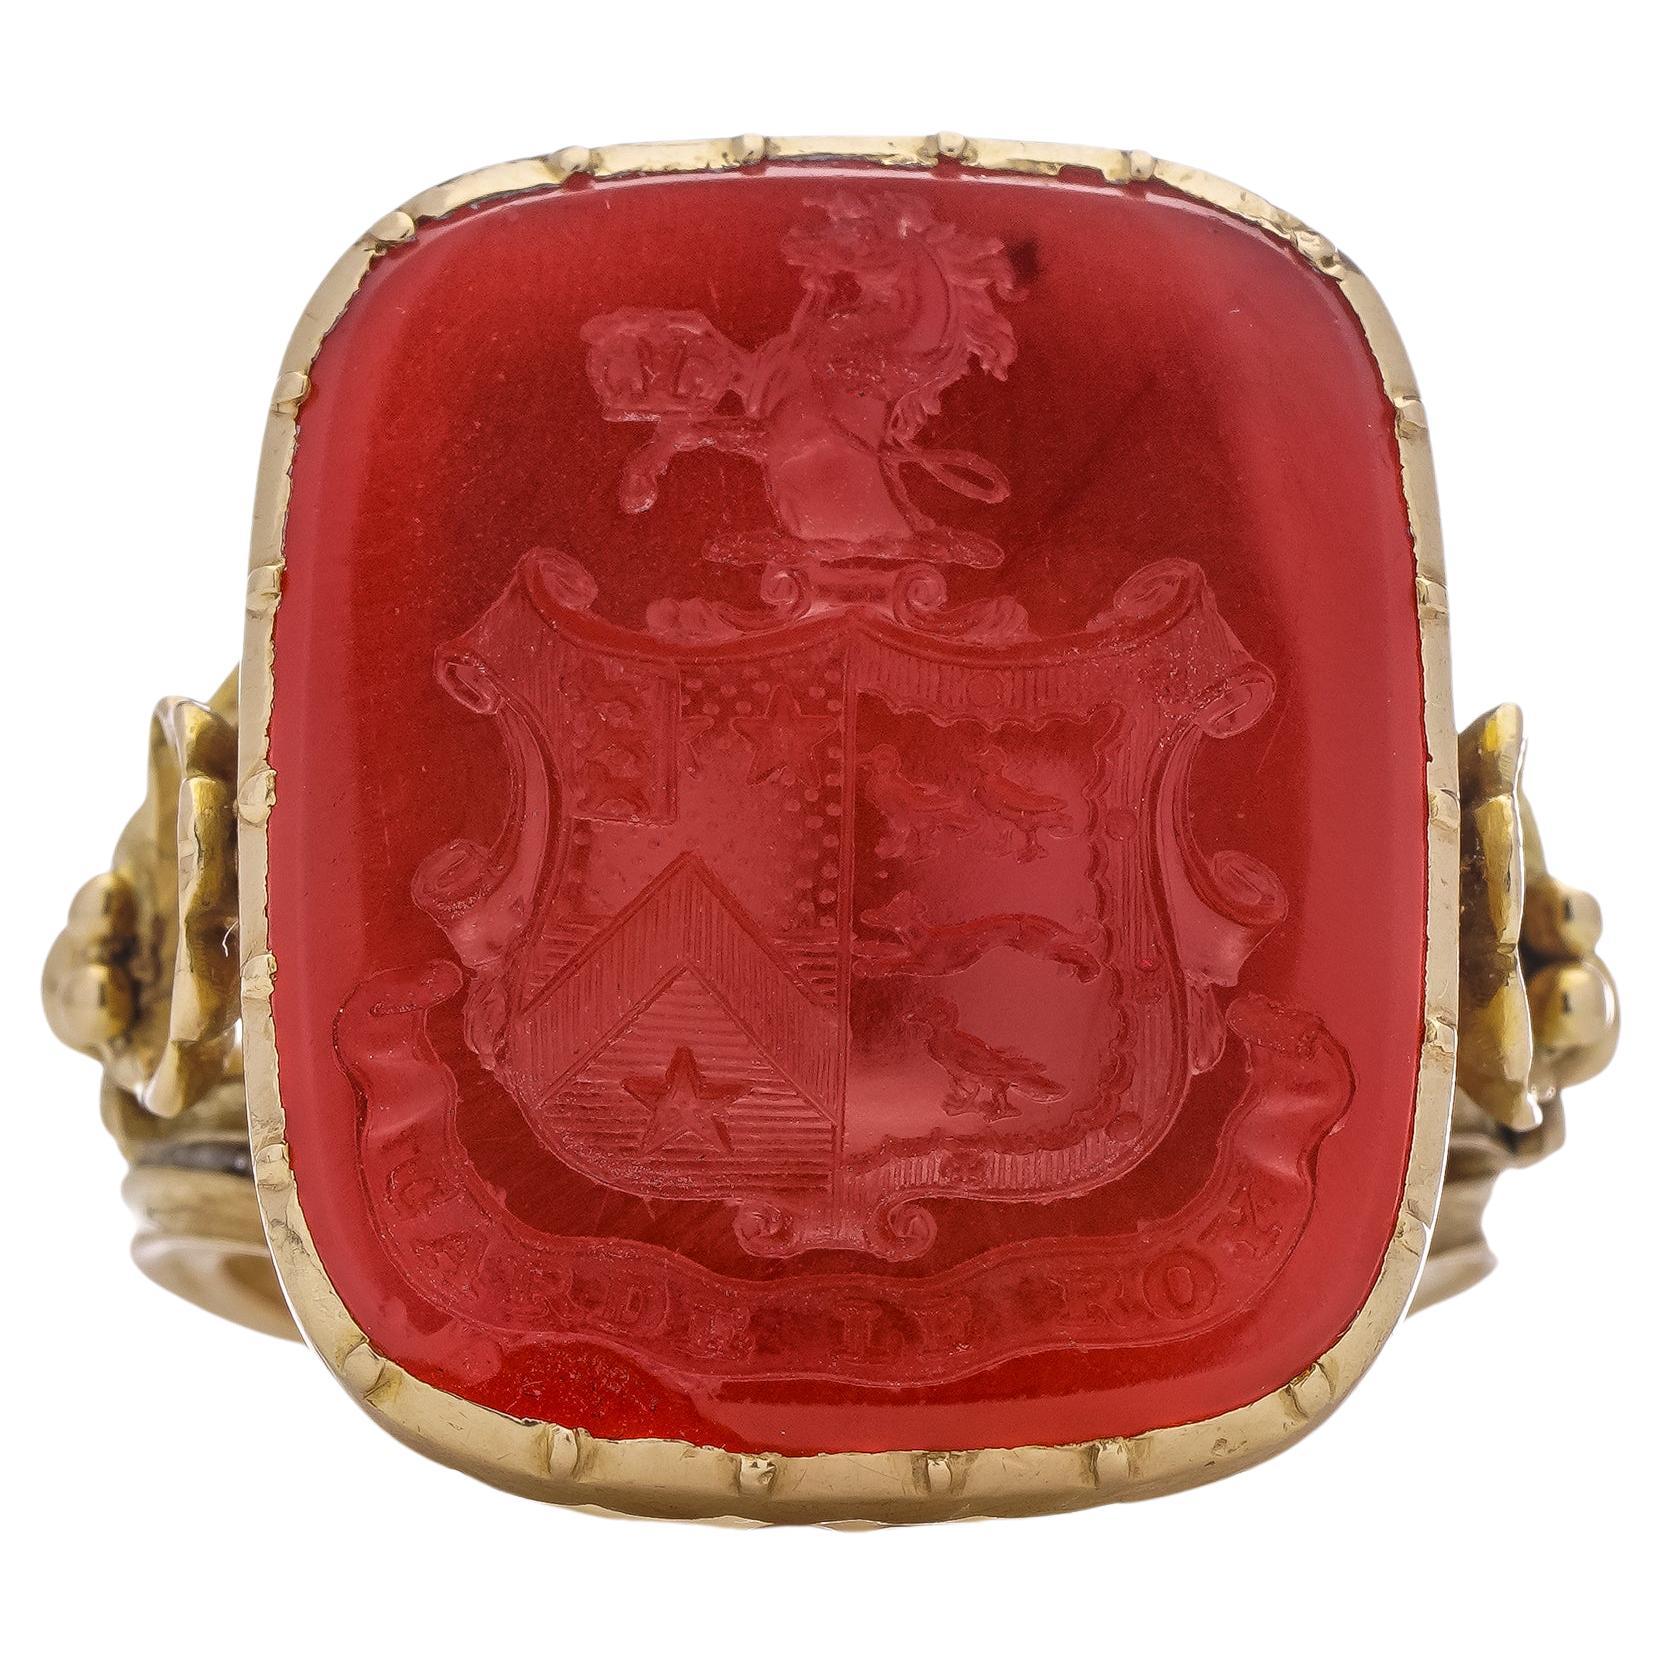 20kt. gold carved carnelian signet ring with coat of arms and Latin phrase